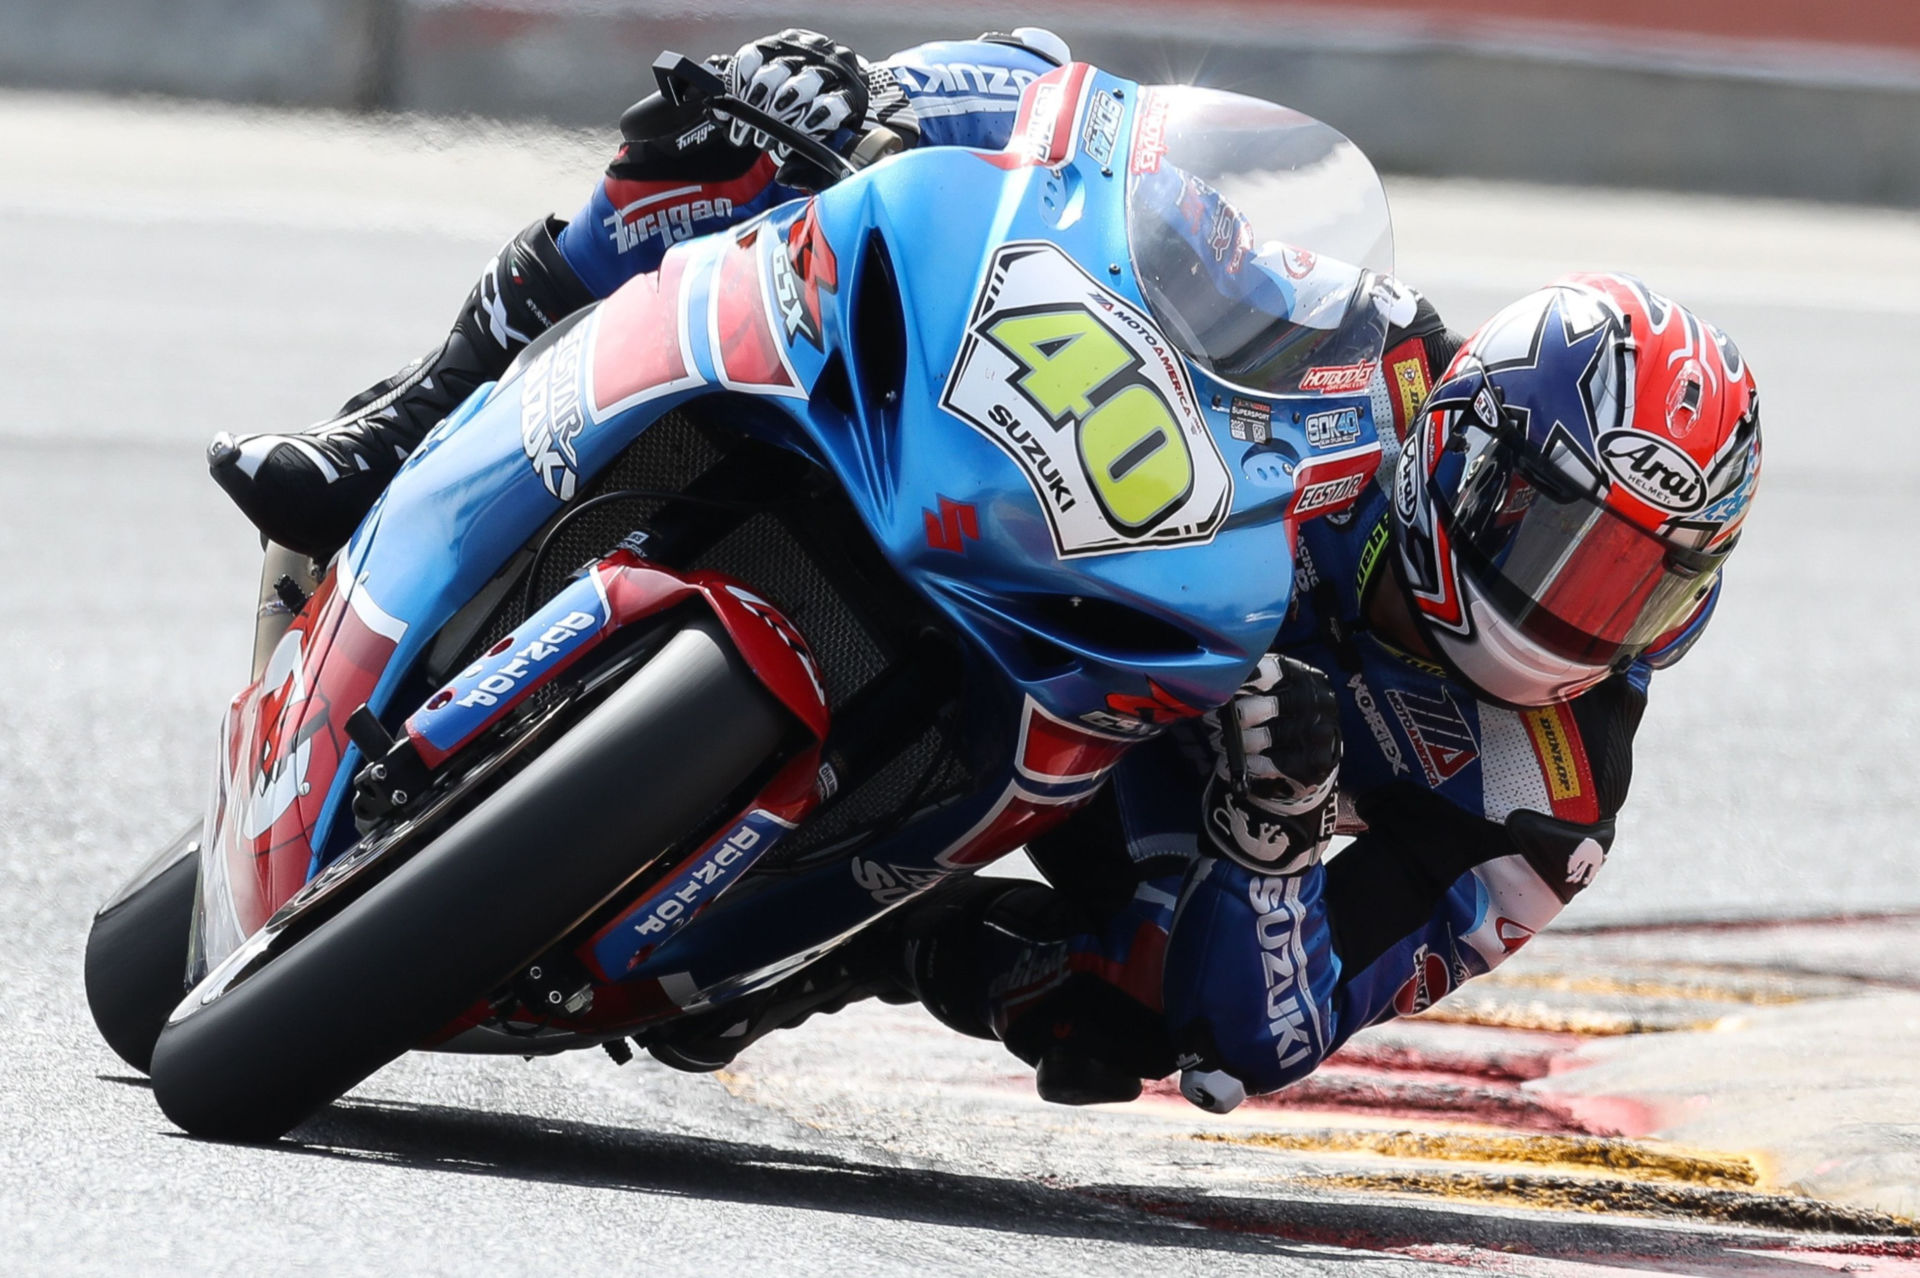 MotoAmerica: Even More From The Races At Road America 2 - Roadracing ...